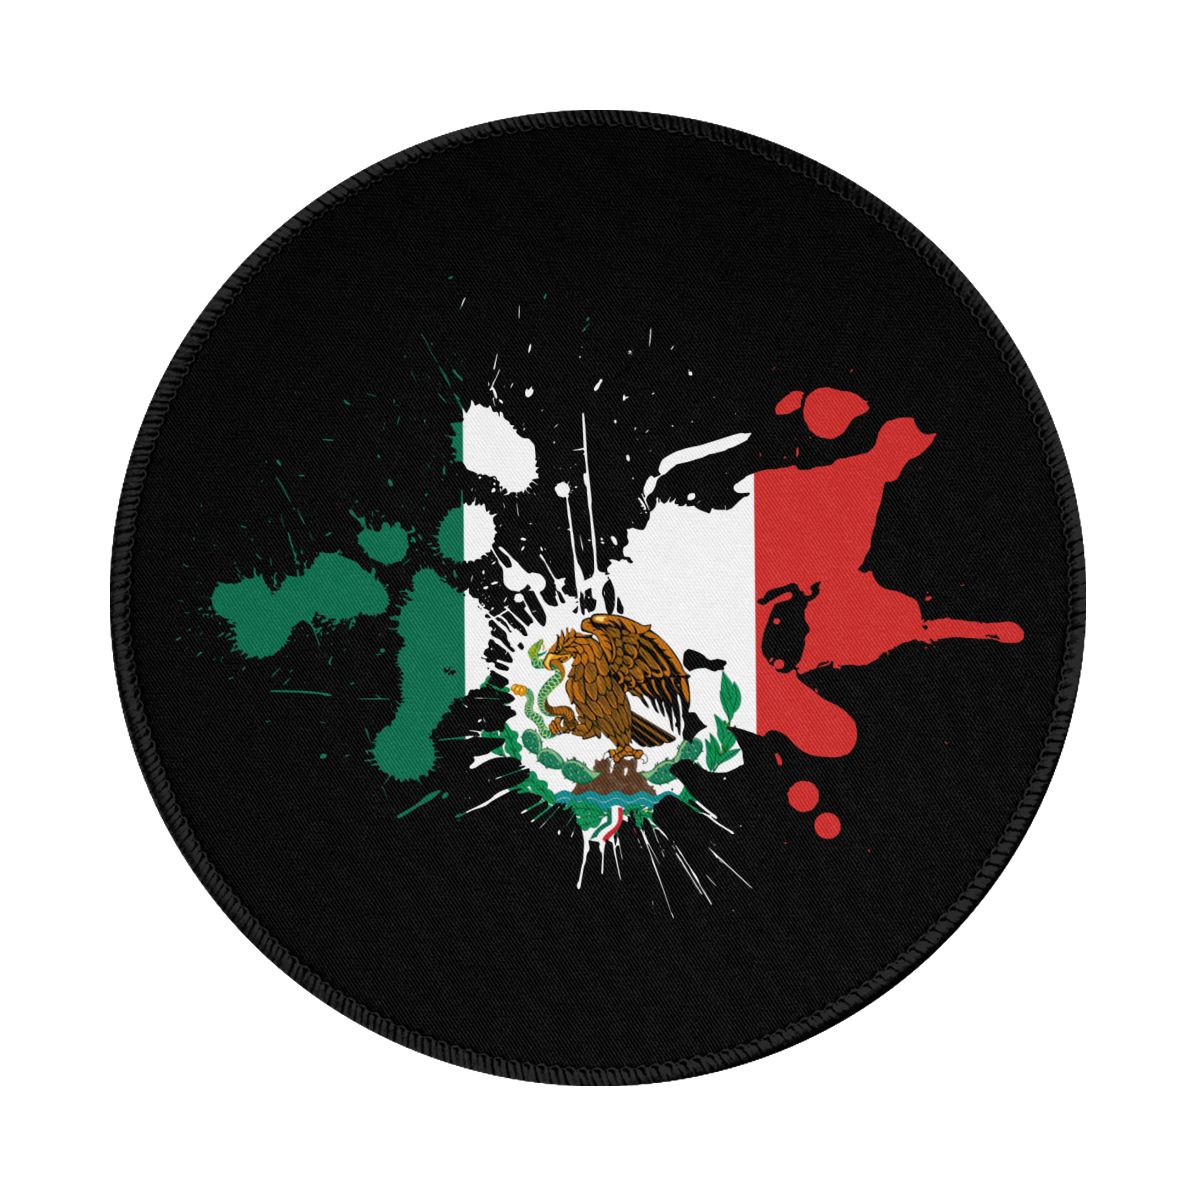 Mexico Ink Spatter Gaming Round Mousepad for Computer Laptop